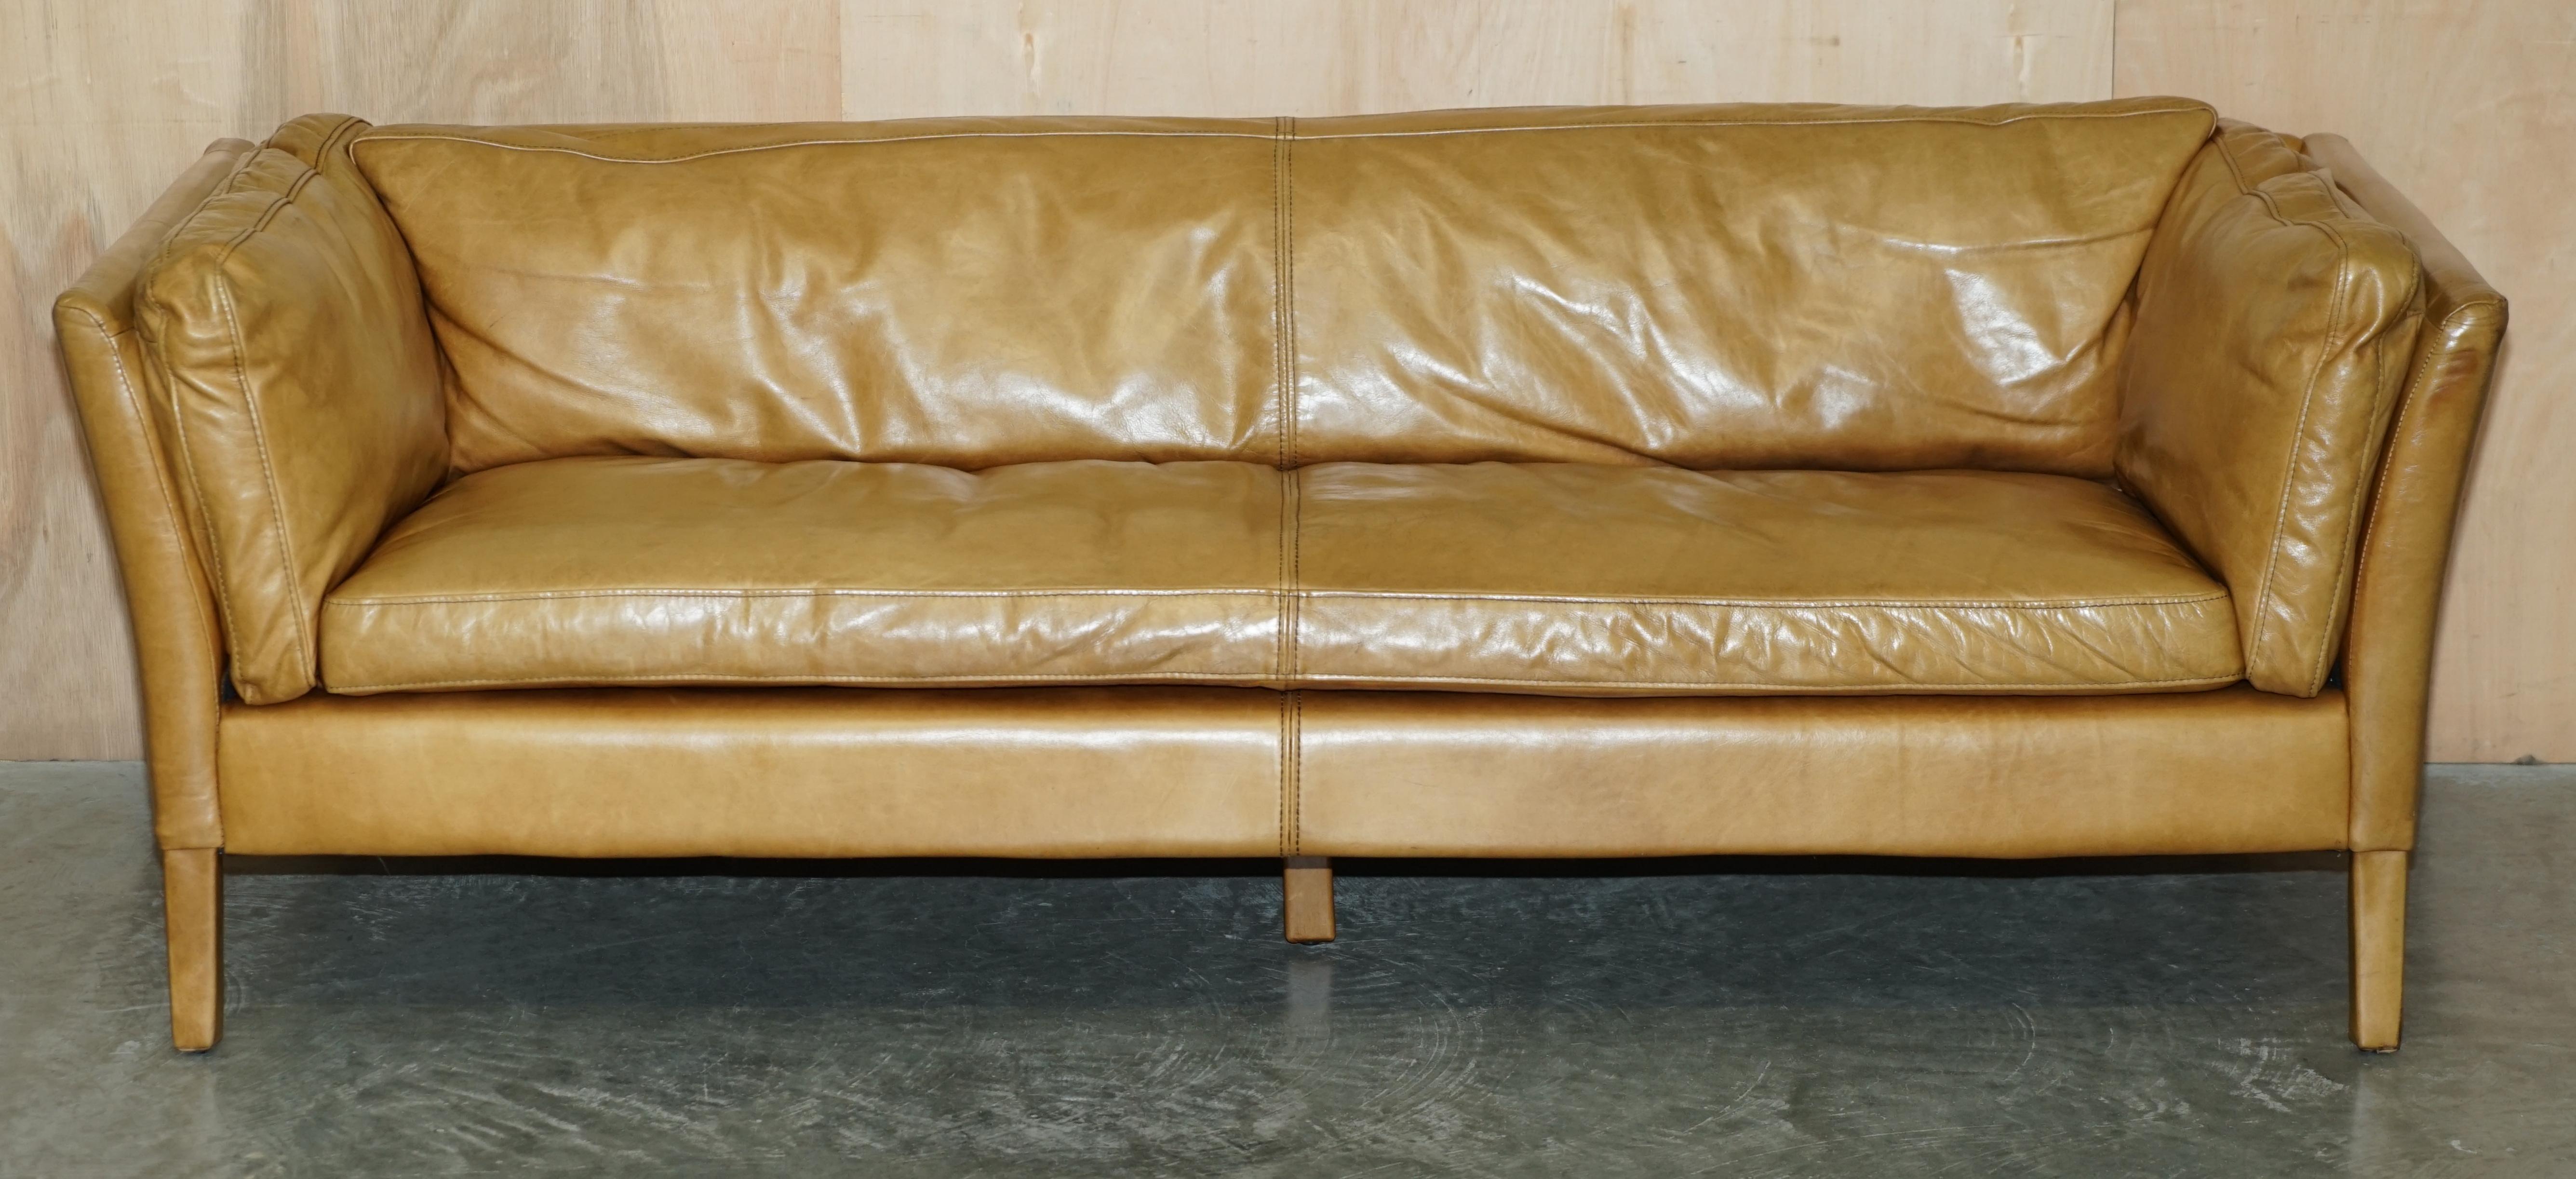 Royal House Antiques

Royal House Antiques is delighted to offer for sale this super comfortable, Halo Groucho, Tan Brown Heritage leather three seat sofa 

Please note the delivery fee listed is just a guide, it covers within the M25 only for the